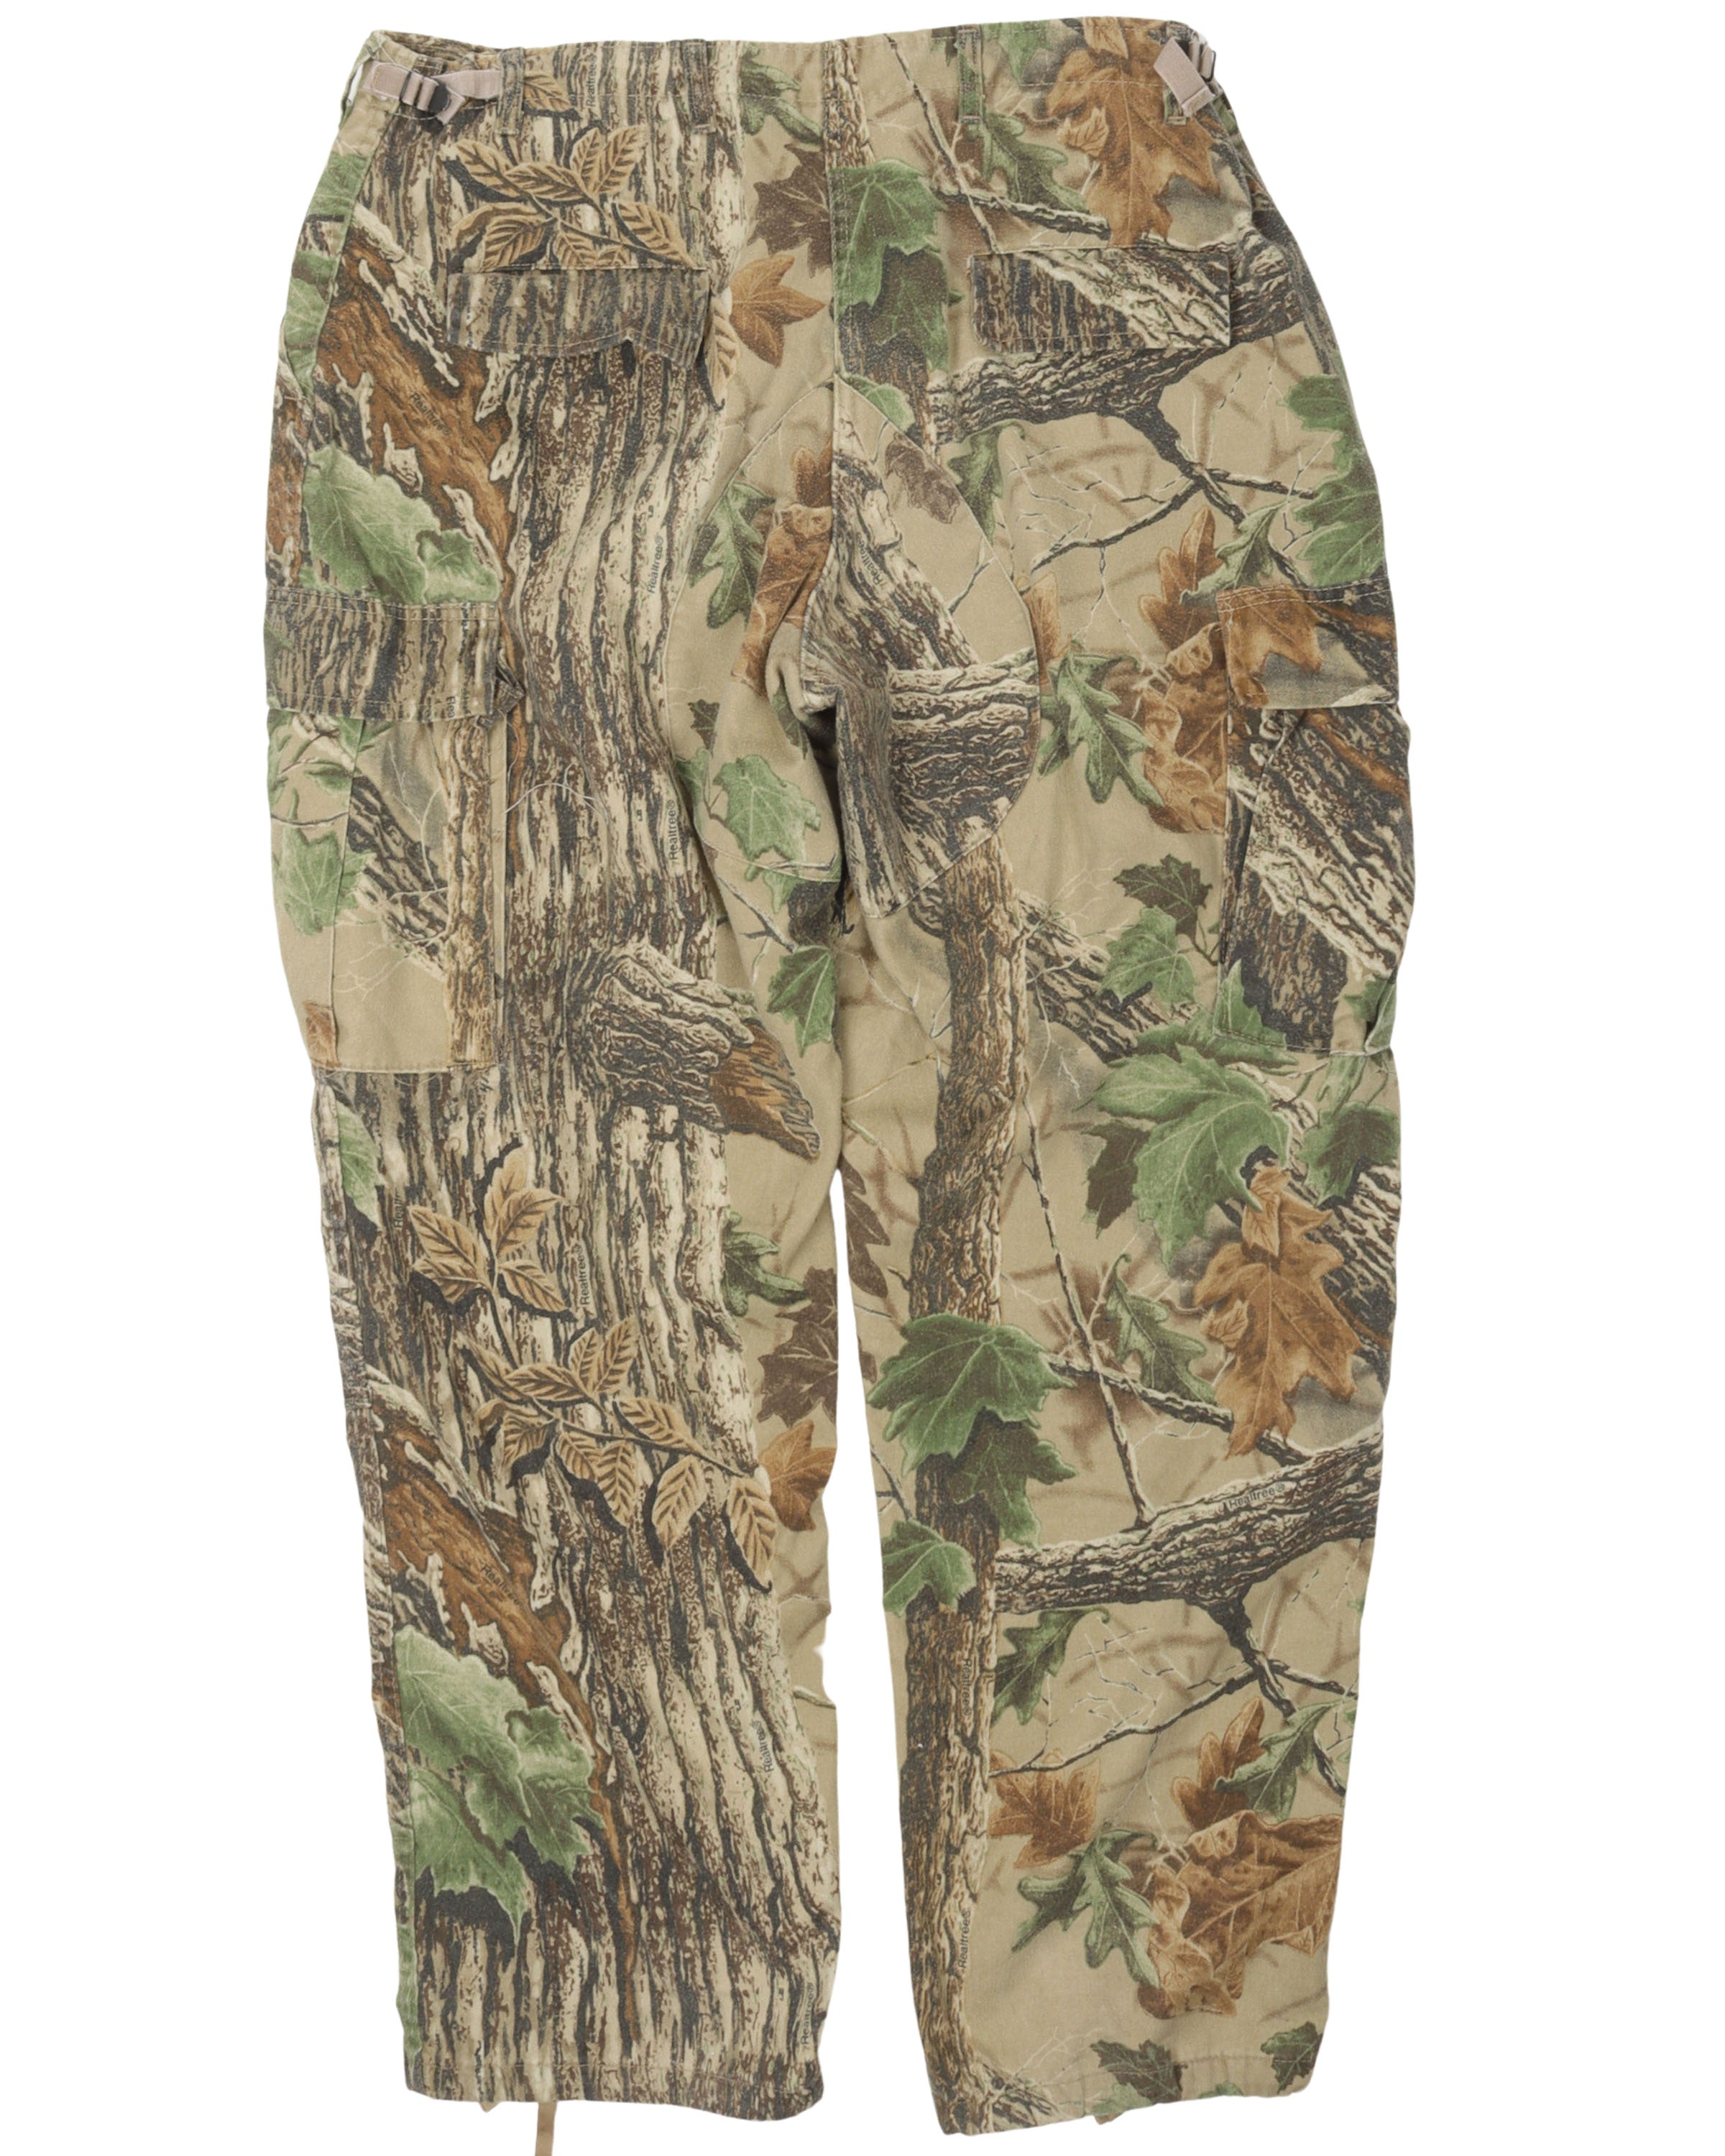 Vintage RealTree Camouflage Cargo Pants